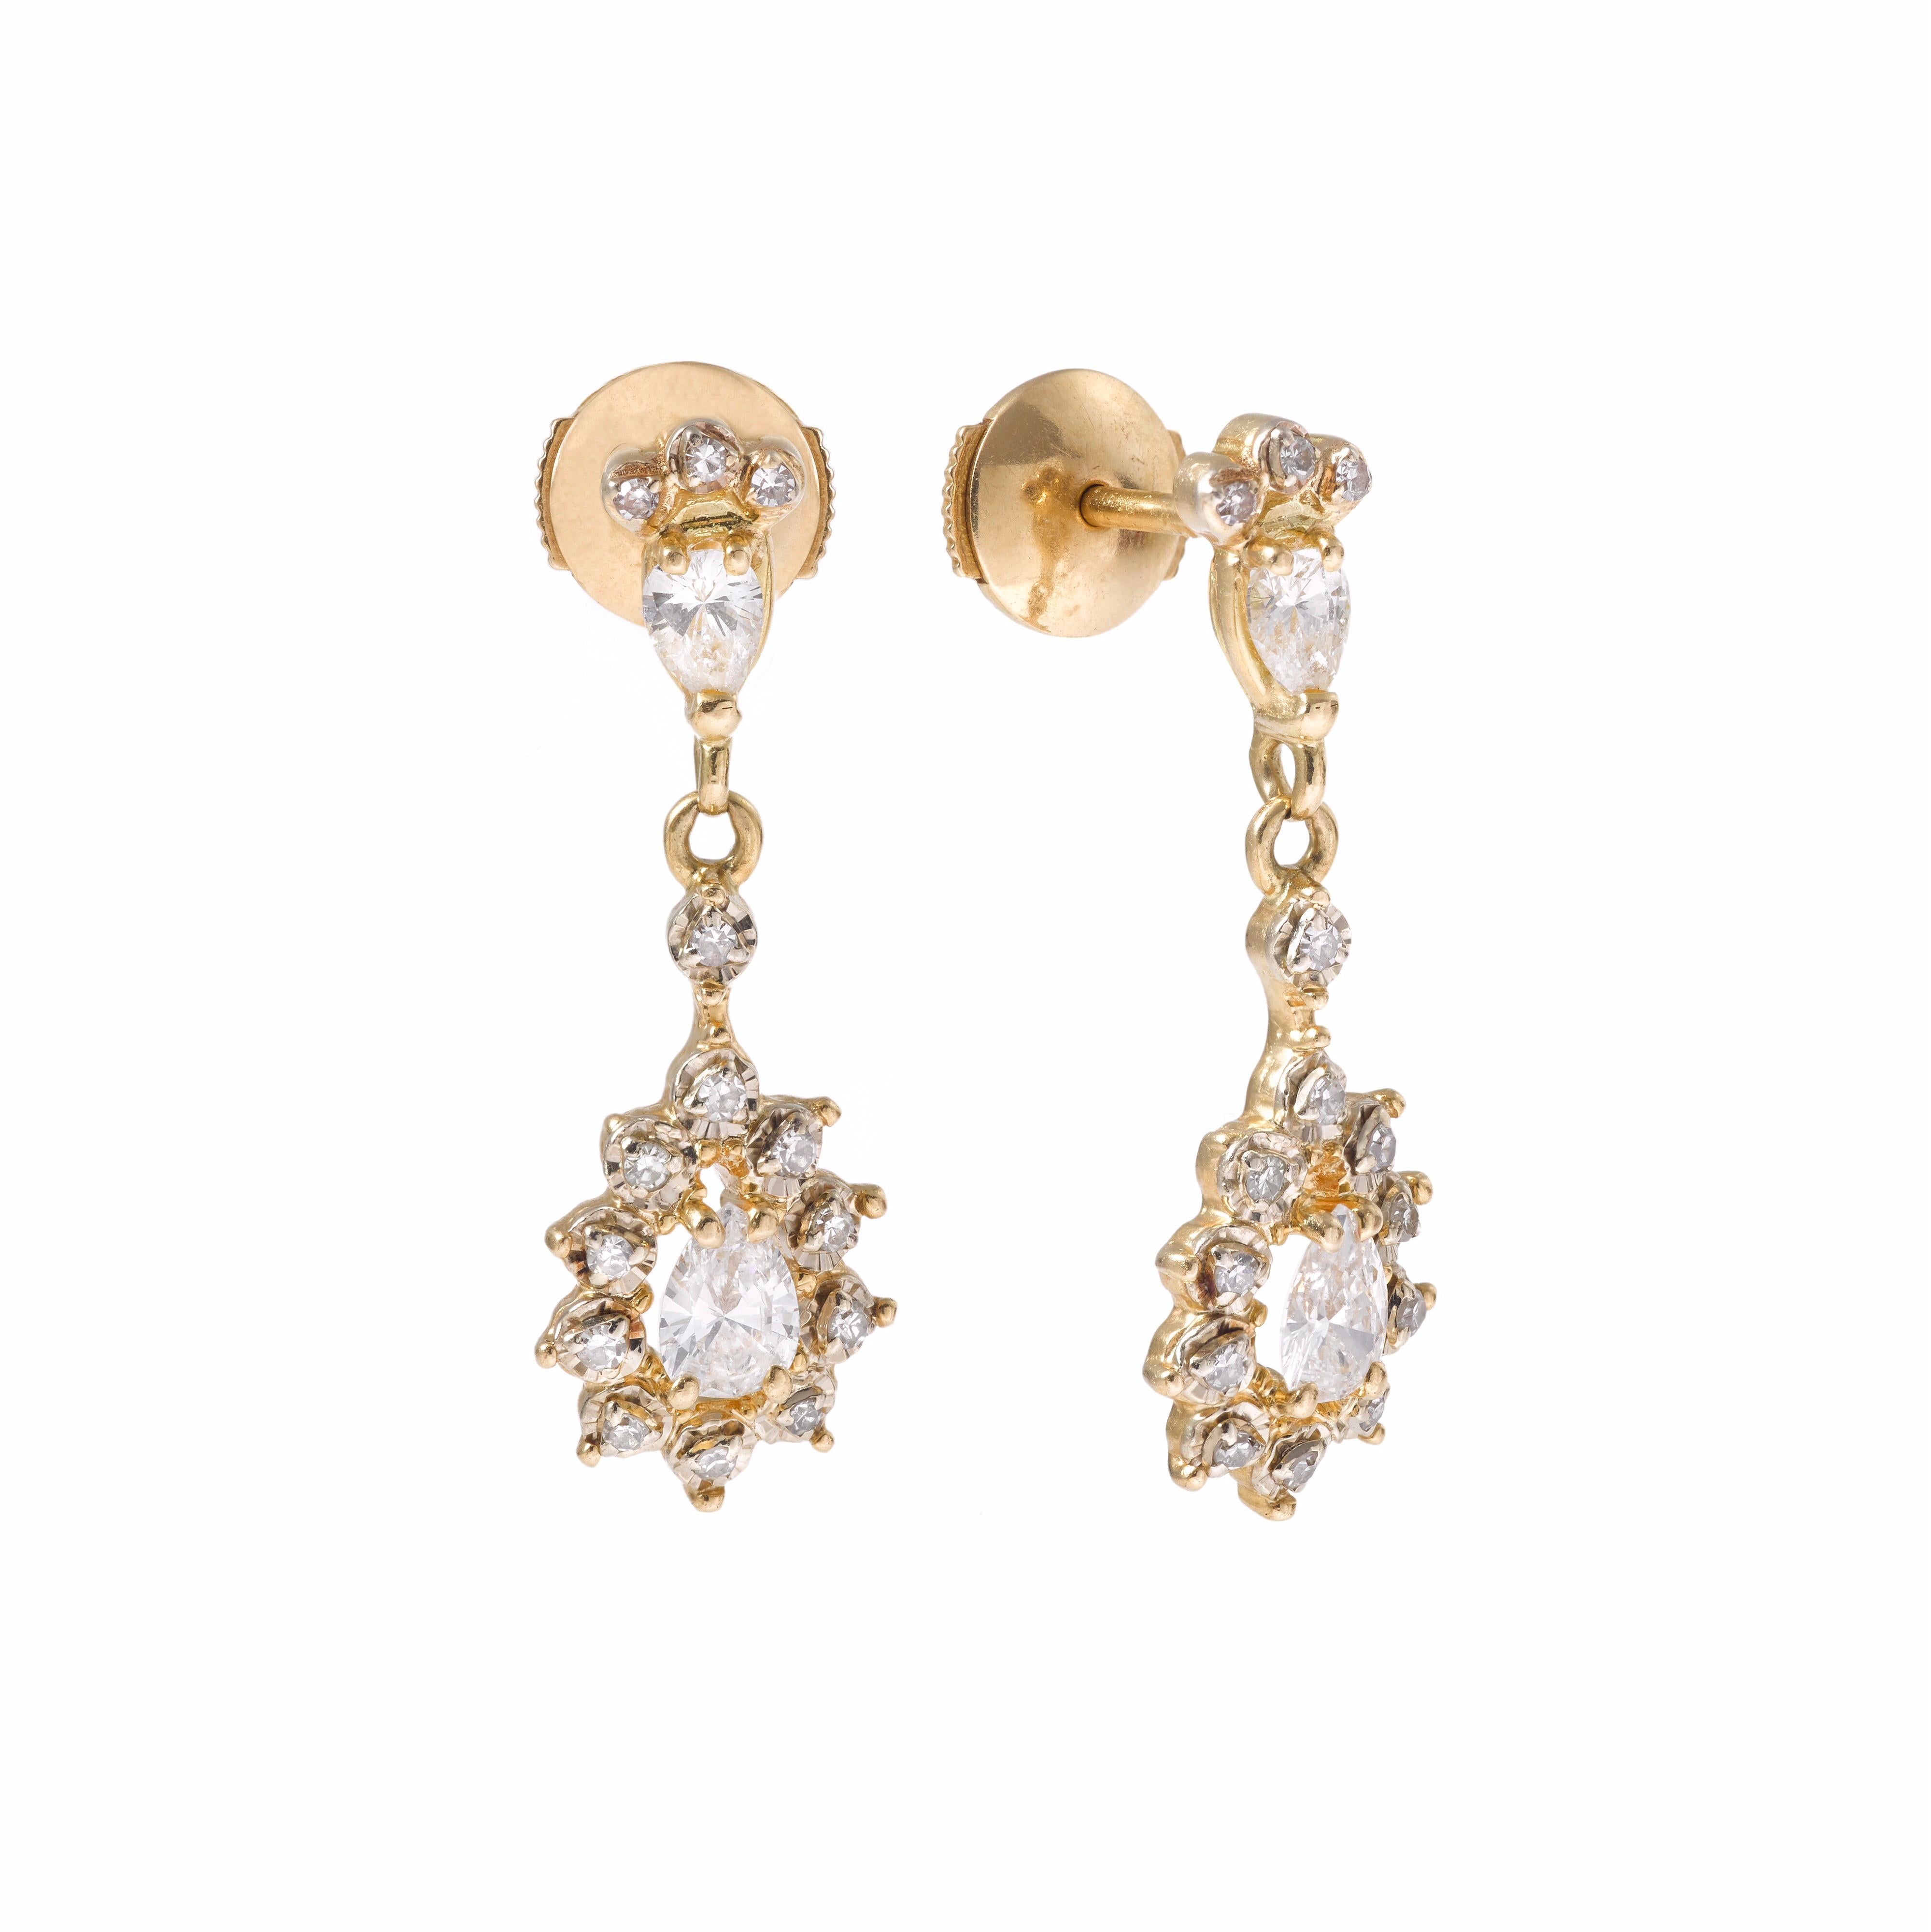 A fine and elegant pair of dangle earrings with 2 pear shape diamonds on each earring.
The top pear diamond with three little diamonds on top and the bottom pear diamond surrounded by 10 round cut diamonds.

2 pear diamonds approx. total weight 0.30